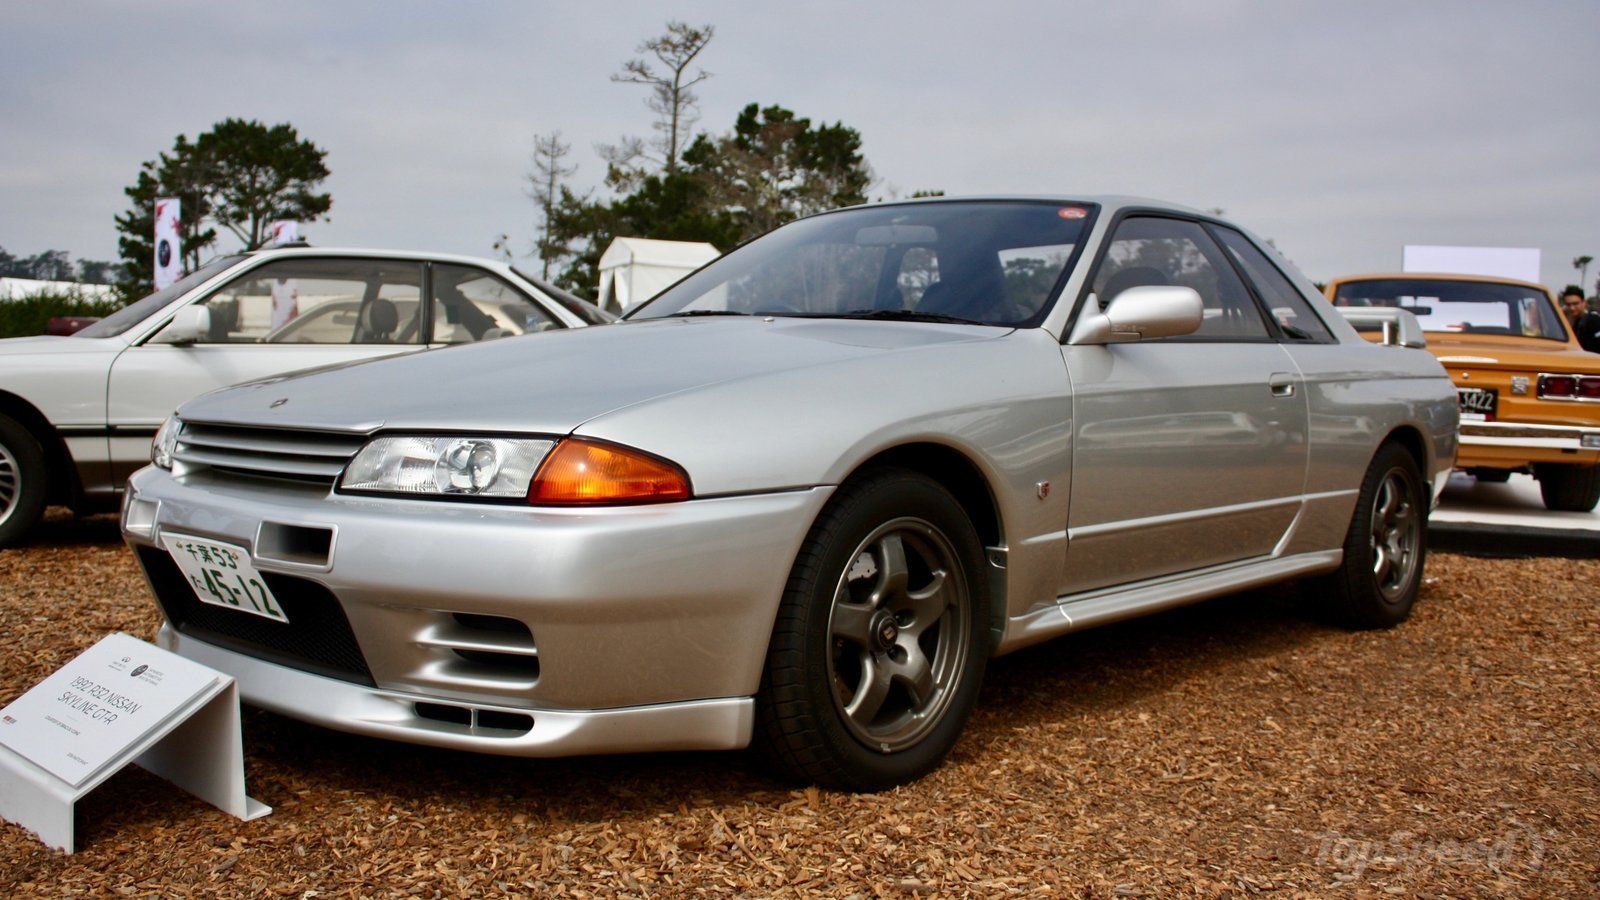 Nissan Skyline R32 GT R V Spec Picture, Photo, Wallpaper And Video